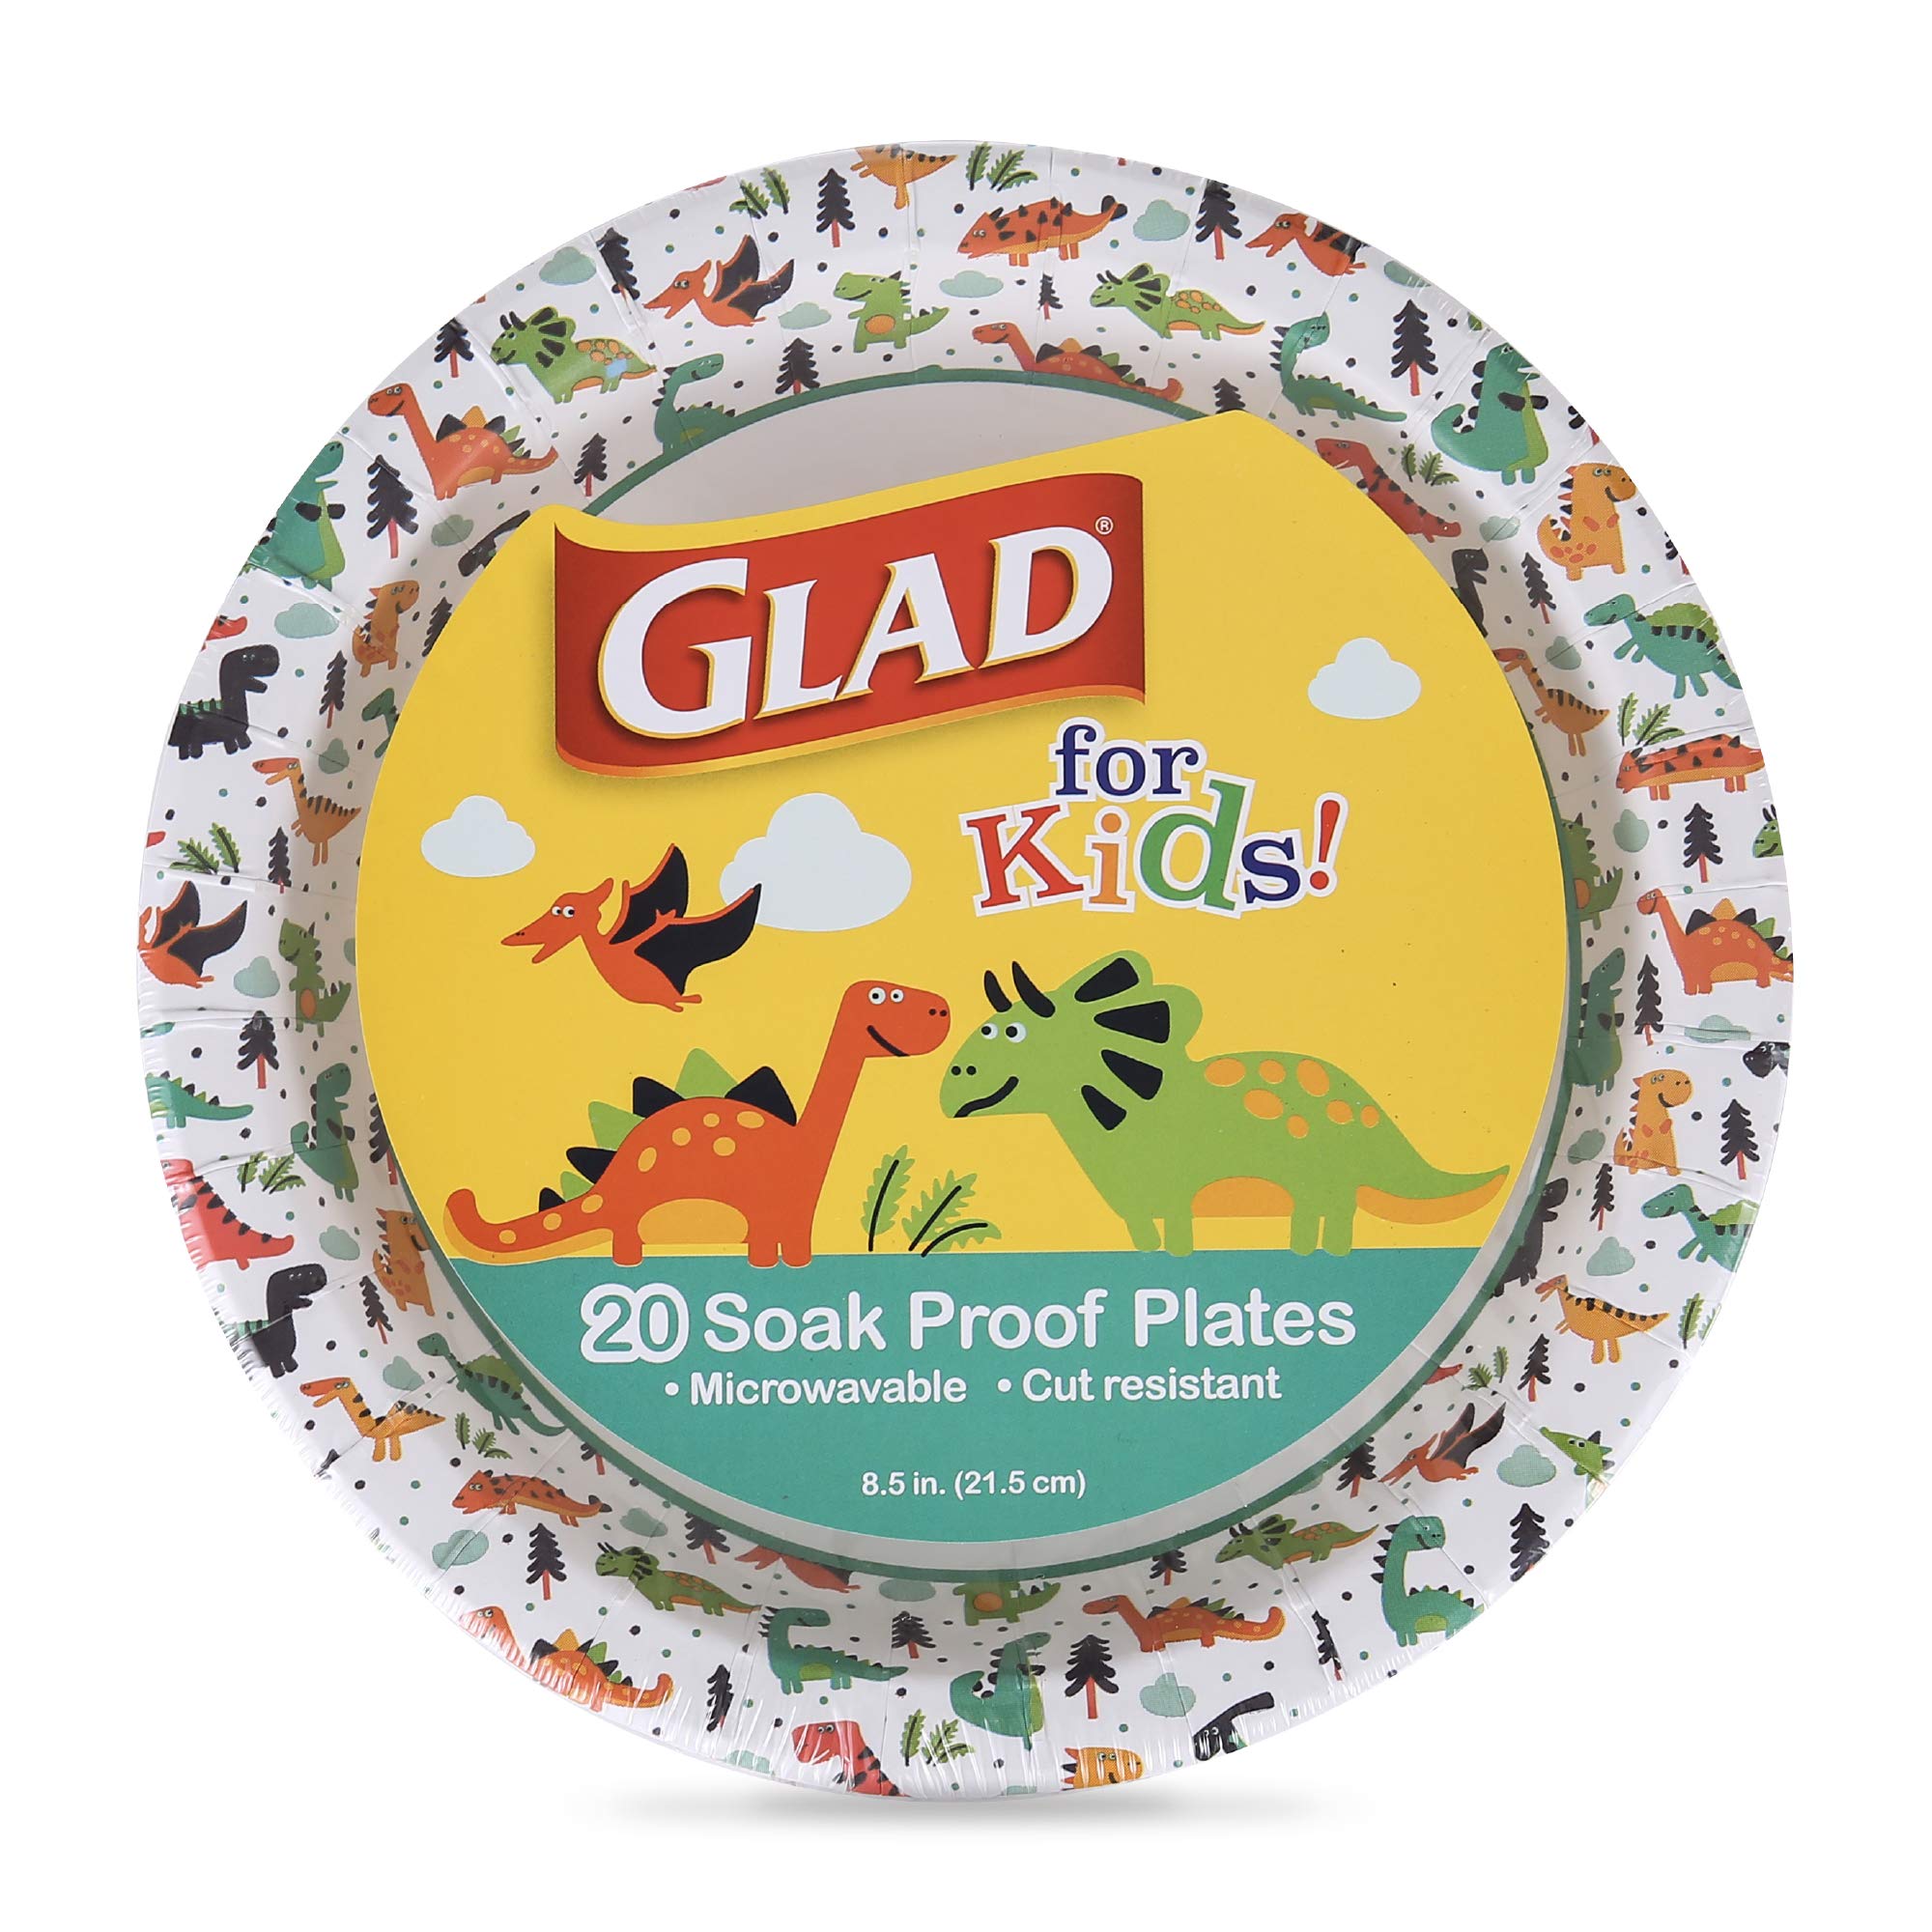 Glad for Kids 8 1/2-Inch Paper Plates, Small Round Paper Plates with  Dinosaurs for Kids, Heavy Duty Disposable Soak Proof Microwavable Paper  Plates, 8.5 Round Plates 20ct